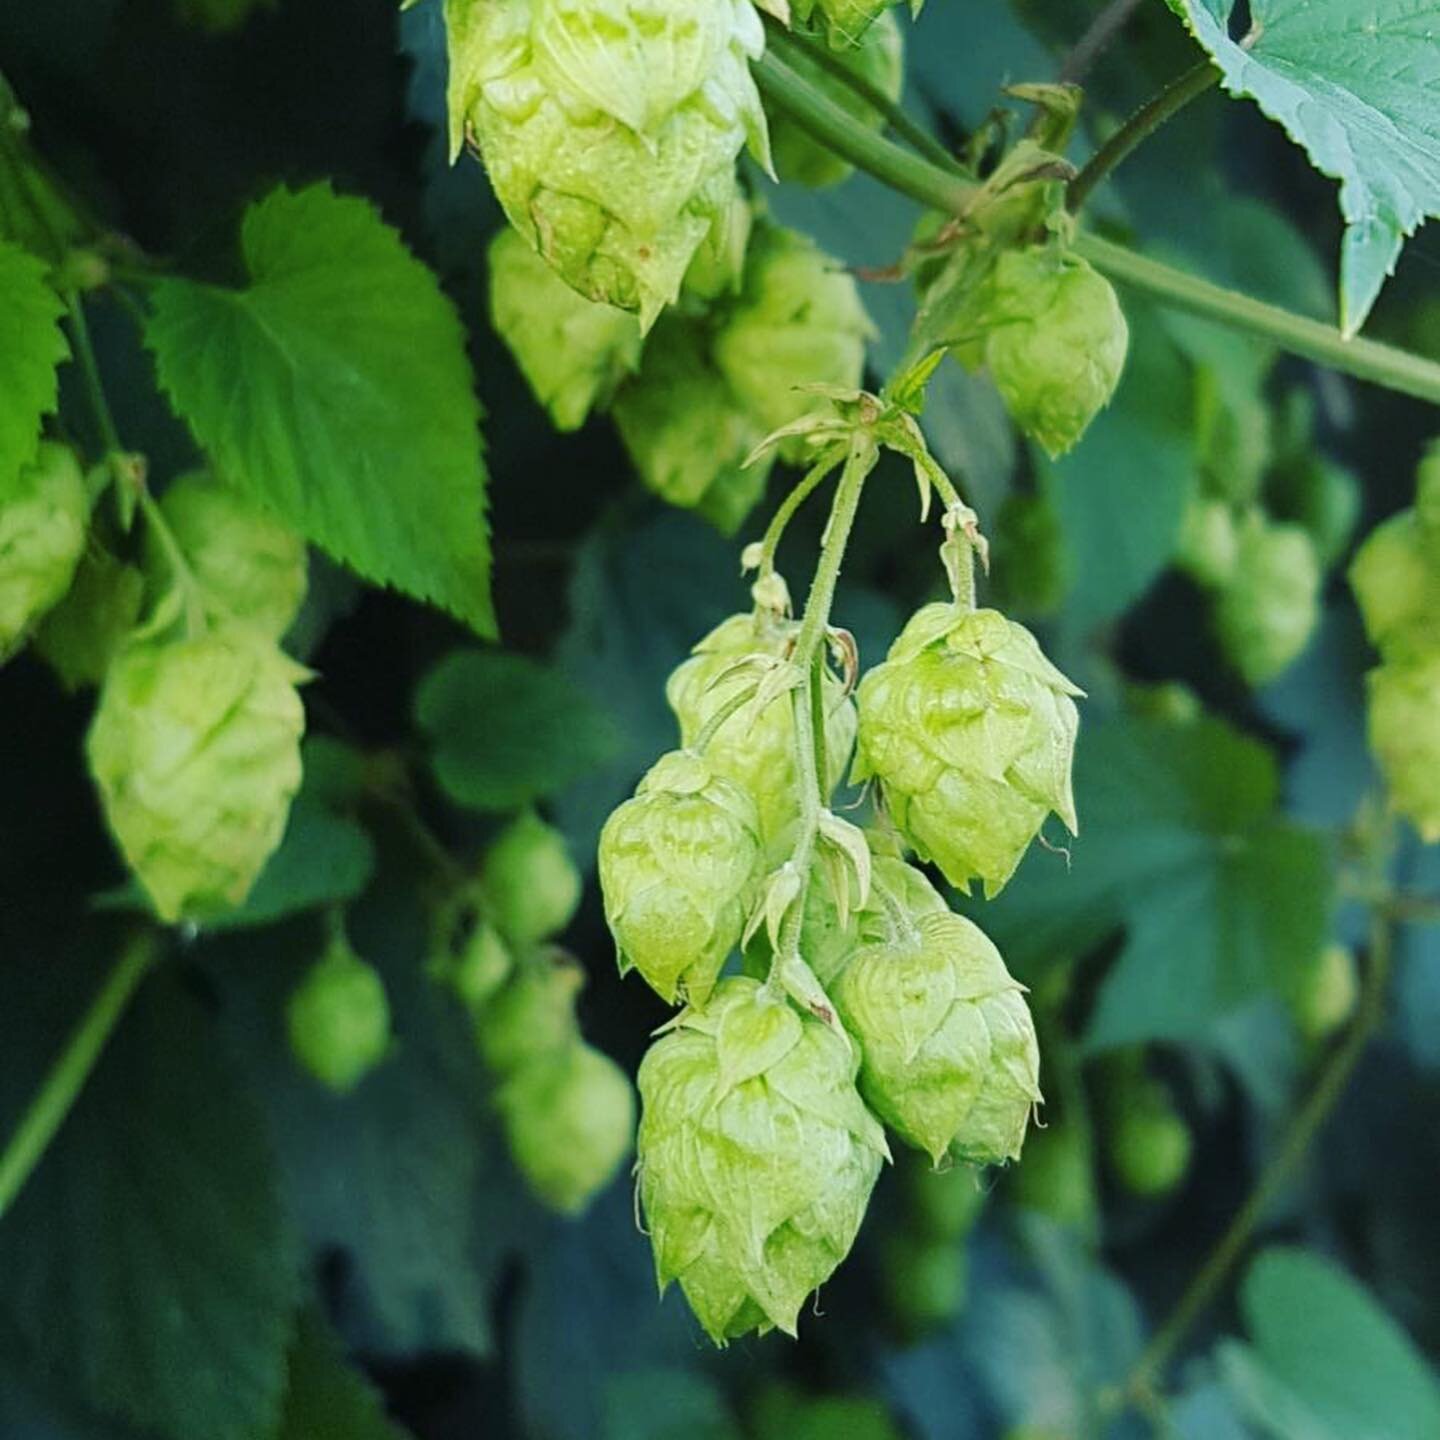 Our team happened to find some Hops growing at our new acreage last week, what are the chances?! If anyone is interested please message our team and we can make some available for fresh or wet hop beers 🍻 this September 😃
&bull;
&bull;
&bull;
&bull